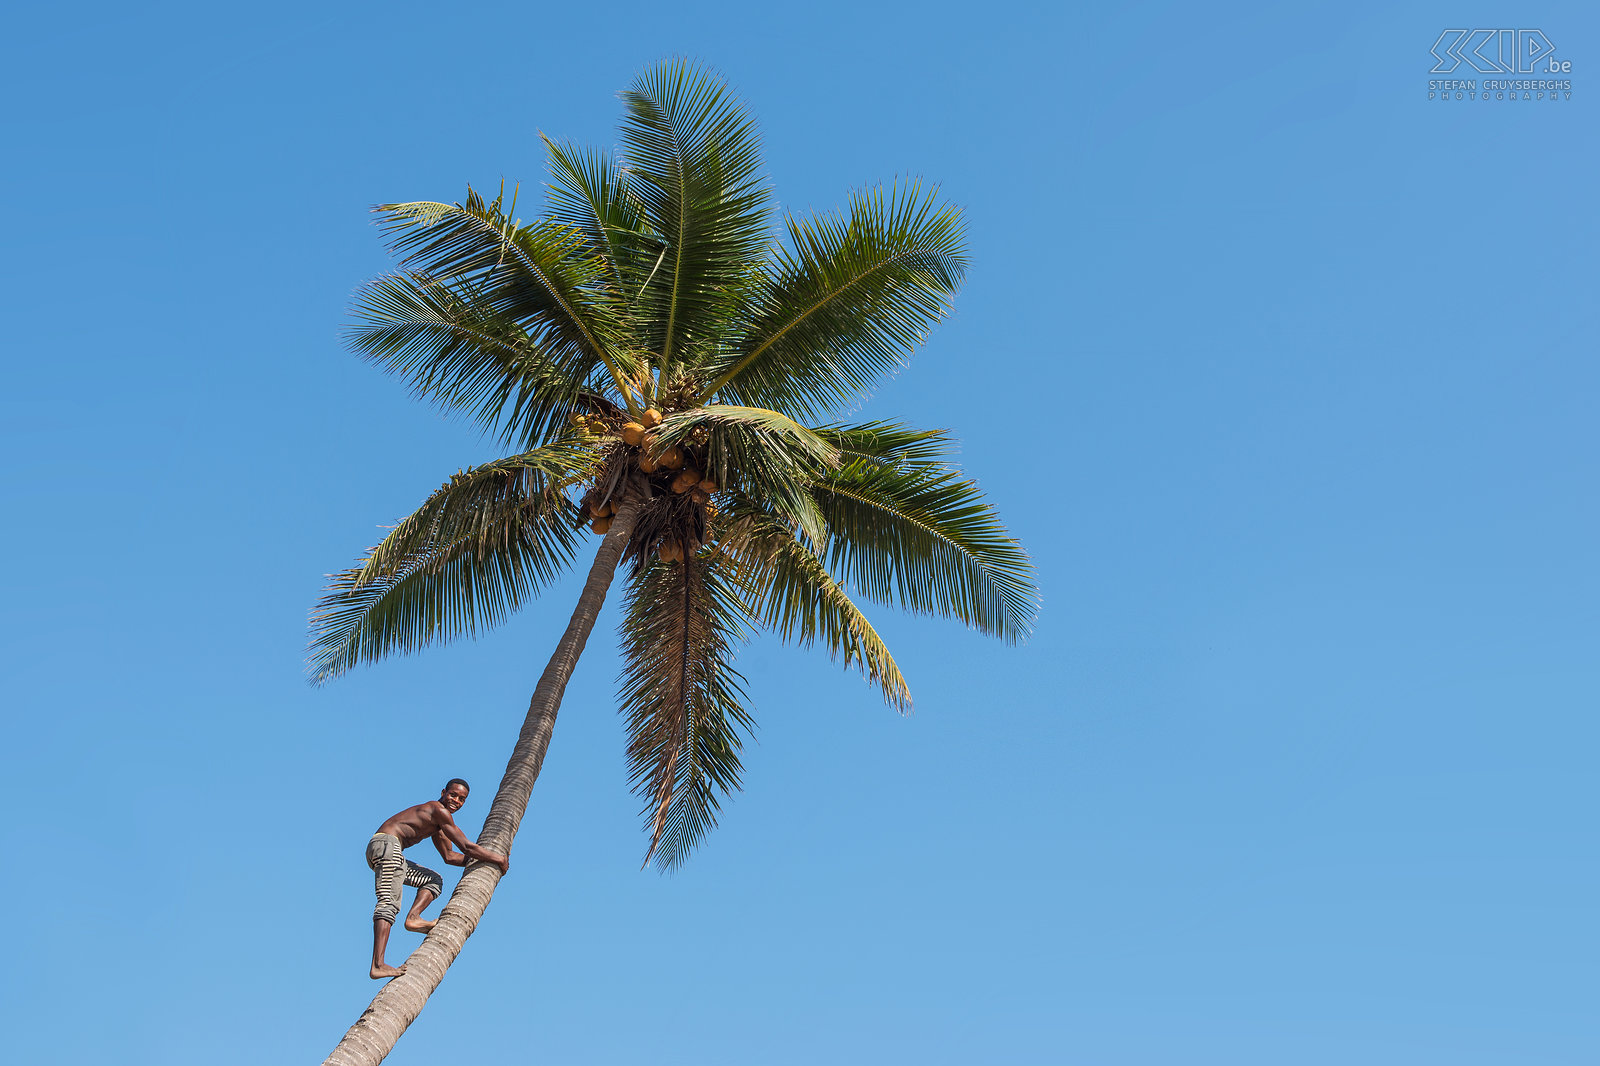 Morondava - Betania Palmtrees with coconuts in Betania, a small fishing village of the Vezo people. Stefan Cruysberghs